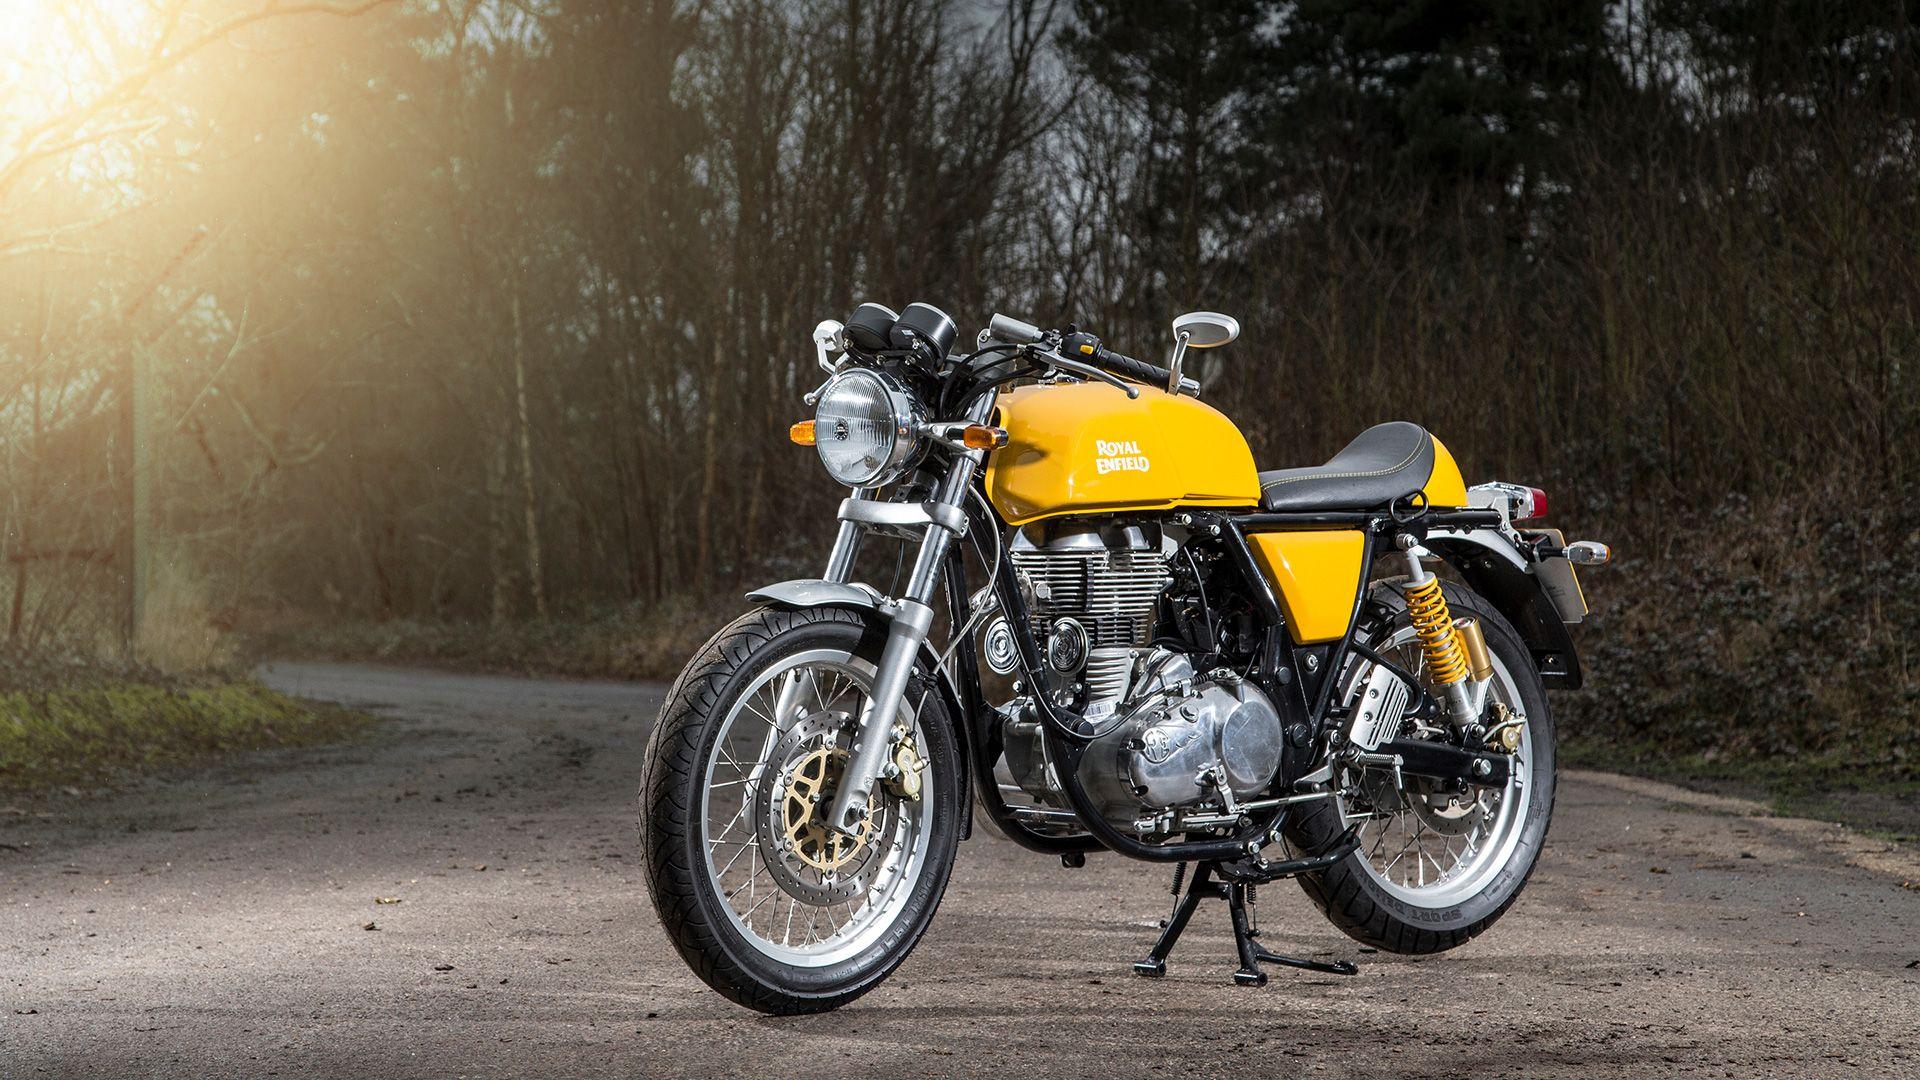 Royal Enfield Continental GT Wallpapers - Wallpaper Cave